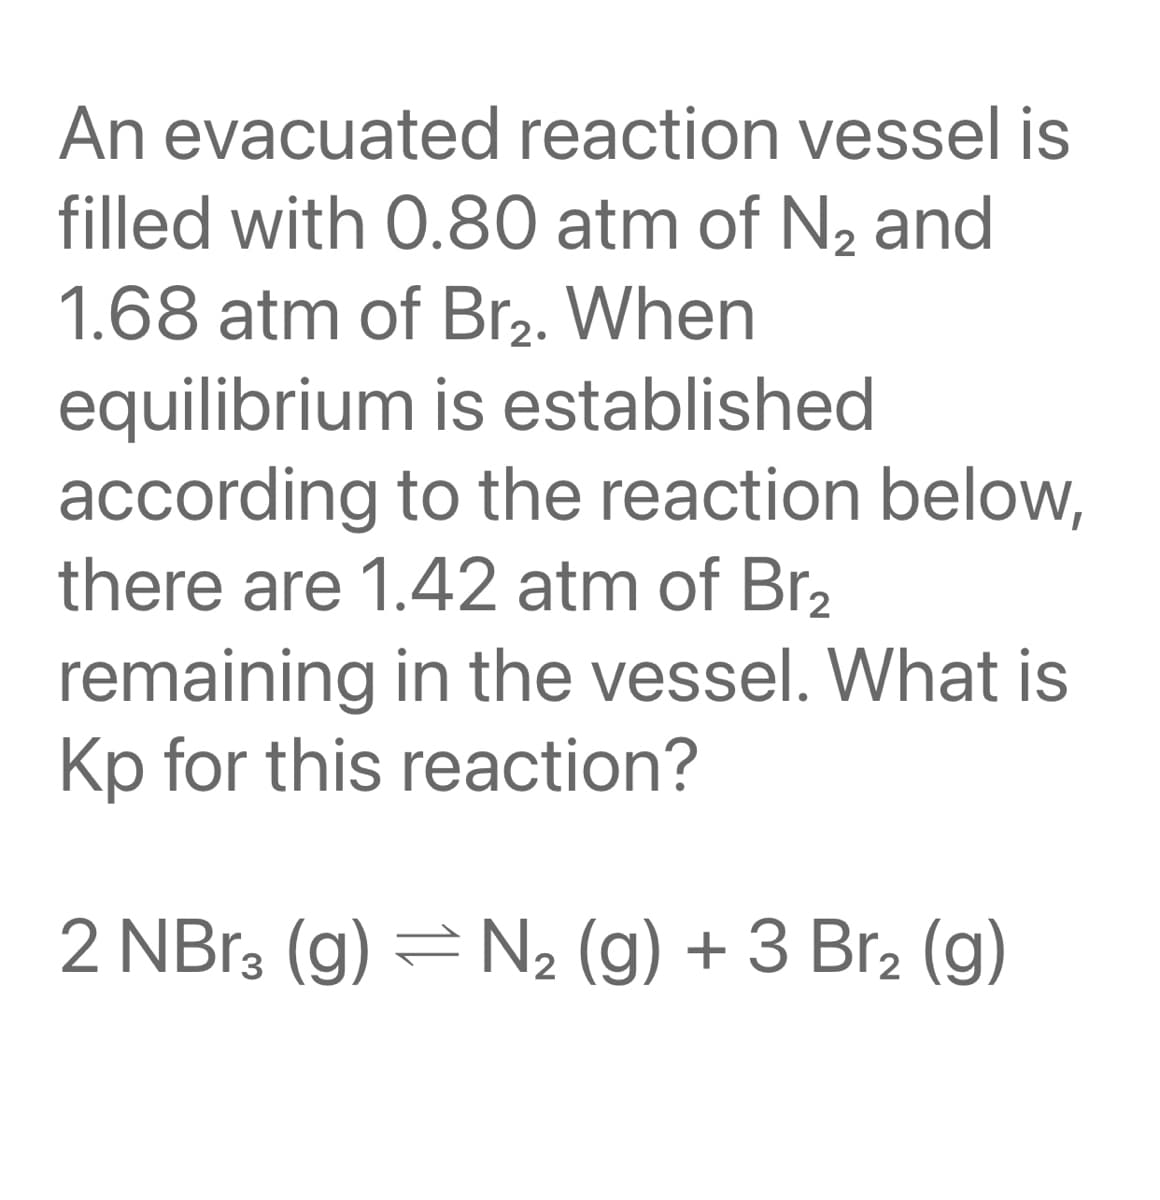 An evacuated reaction vessel is
filled with 0.80 atm of N2 and
1.68 atm of Br2. When
equilibrium is established
according to the reaction below,
there are 1.42 atm of Br2
remaining in the vessel. What is
Kp for this reaction?
2 NB13 (g) = N2 (g) + 3 Br2 (g)
